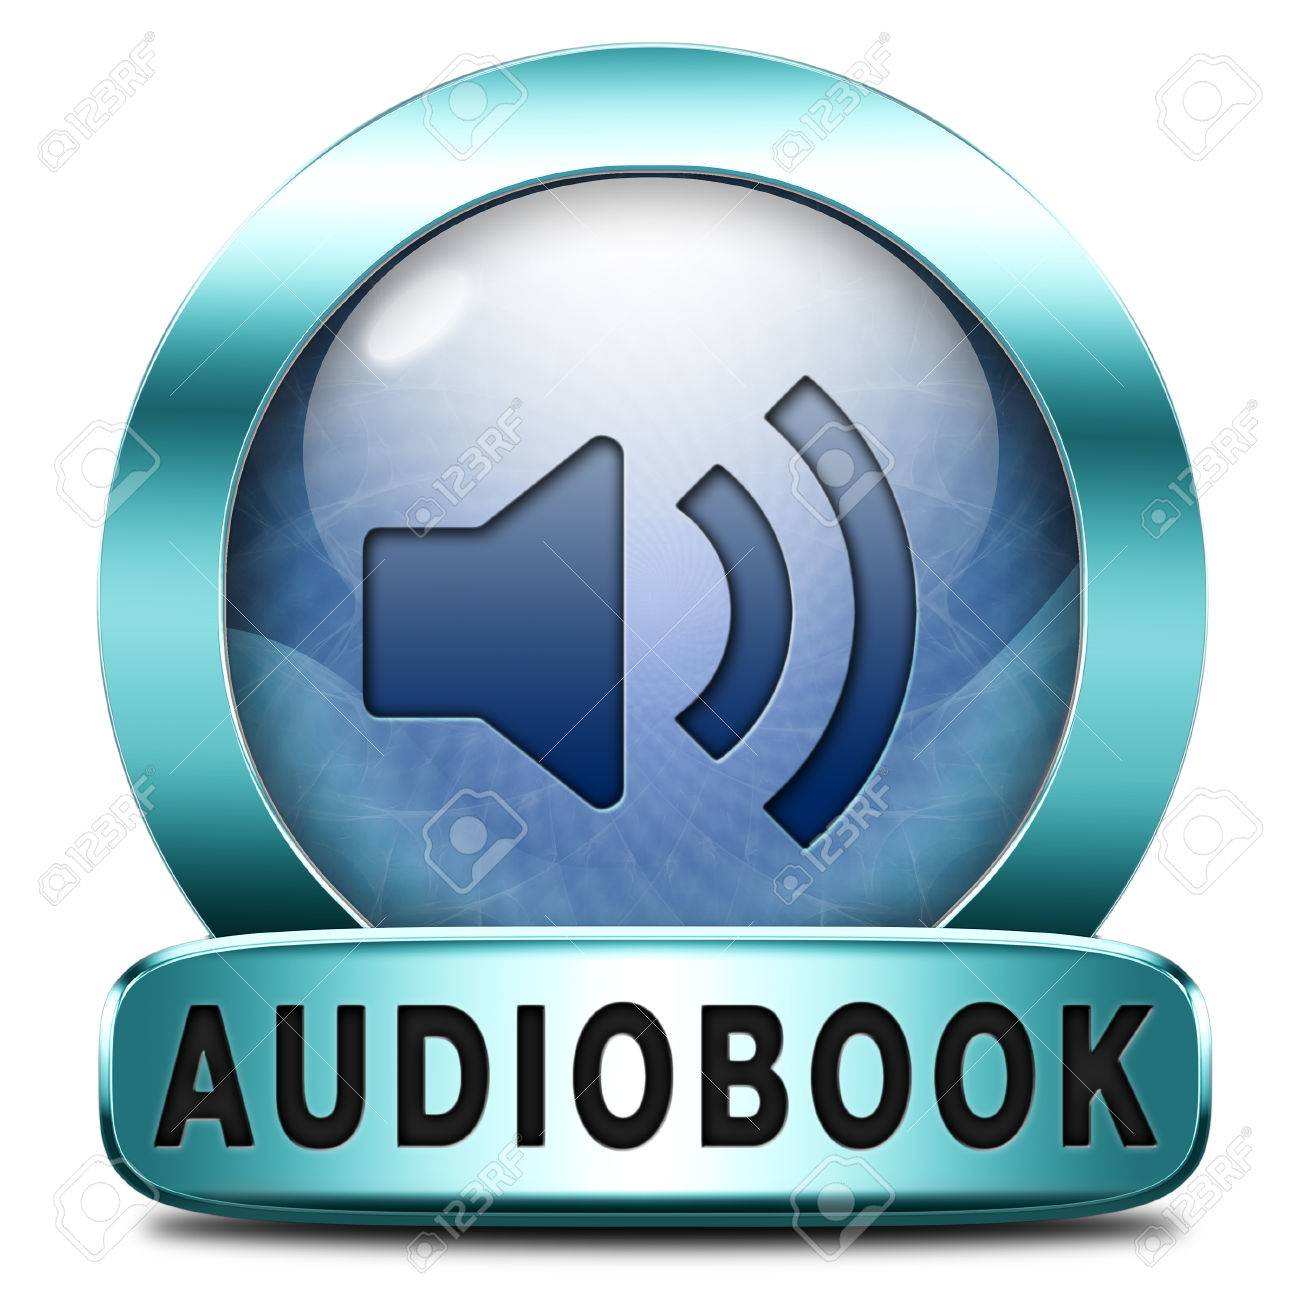 Audiobook icons set stock photo. Image of graphic, notes - 31875018